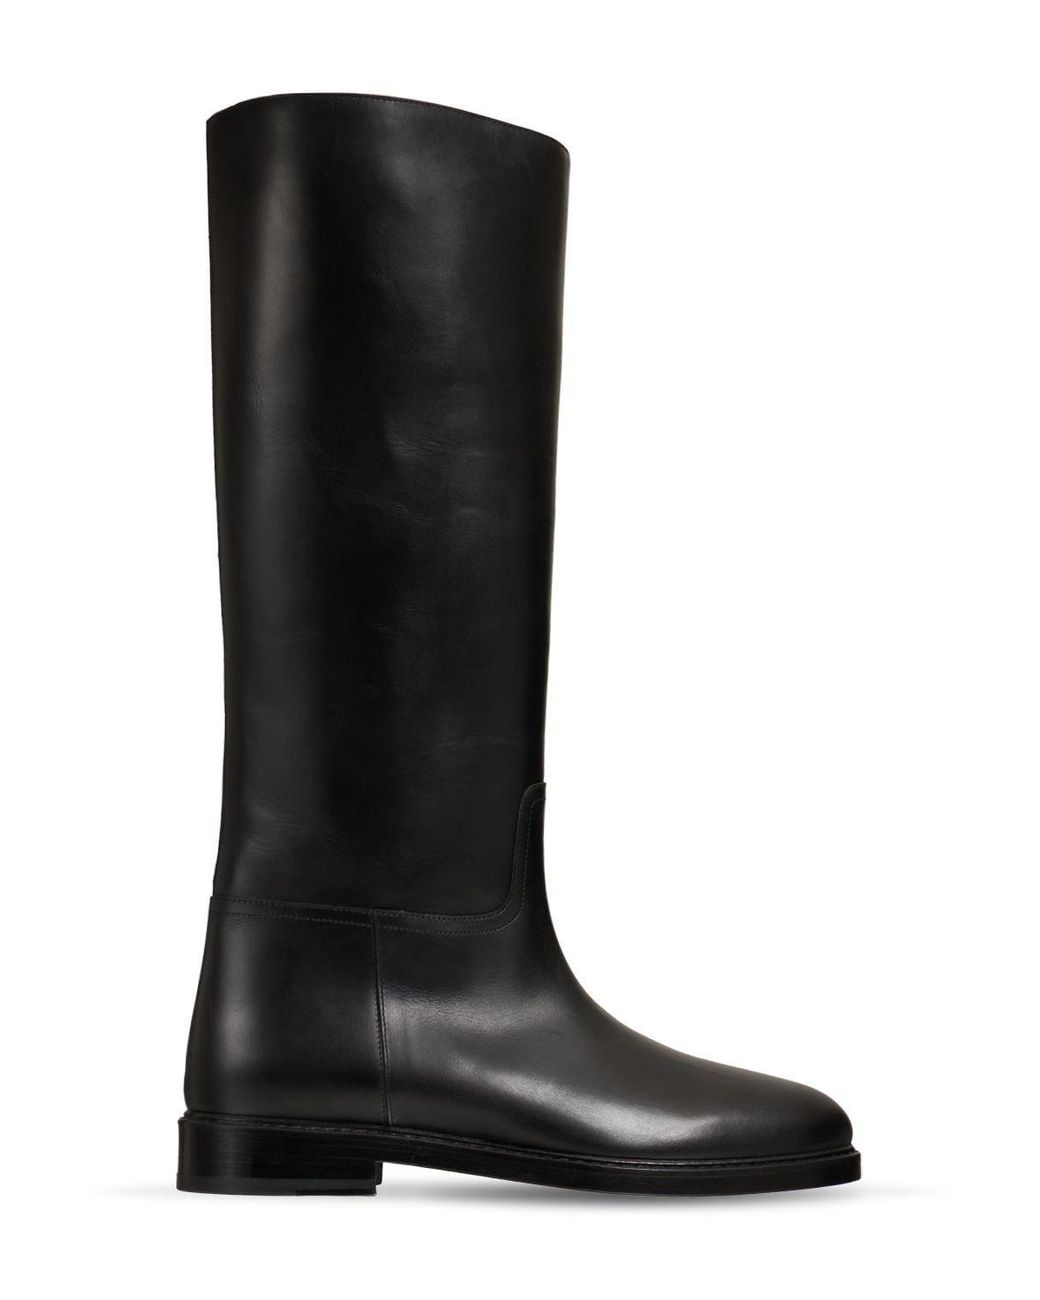 LEGRES 25mm Leather Riding Boots in Black | Lyst